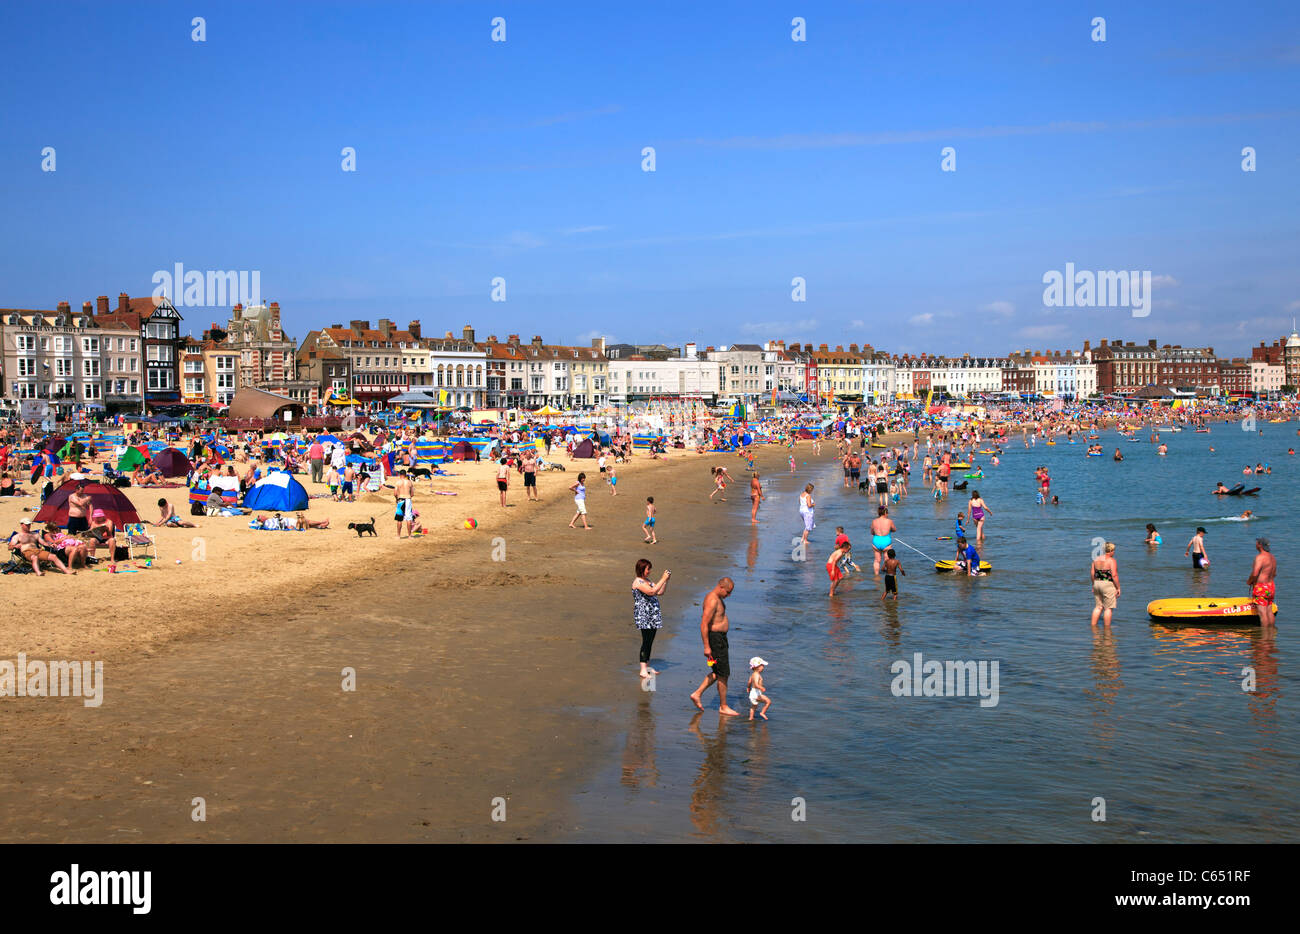 Weymouth Banque D'Images